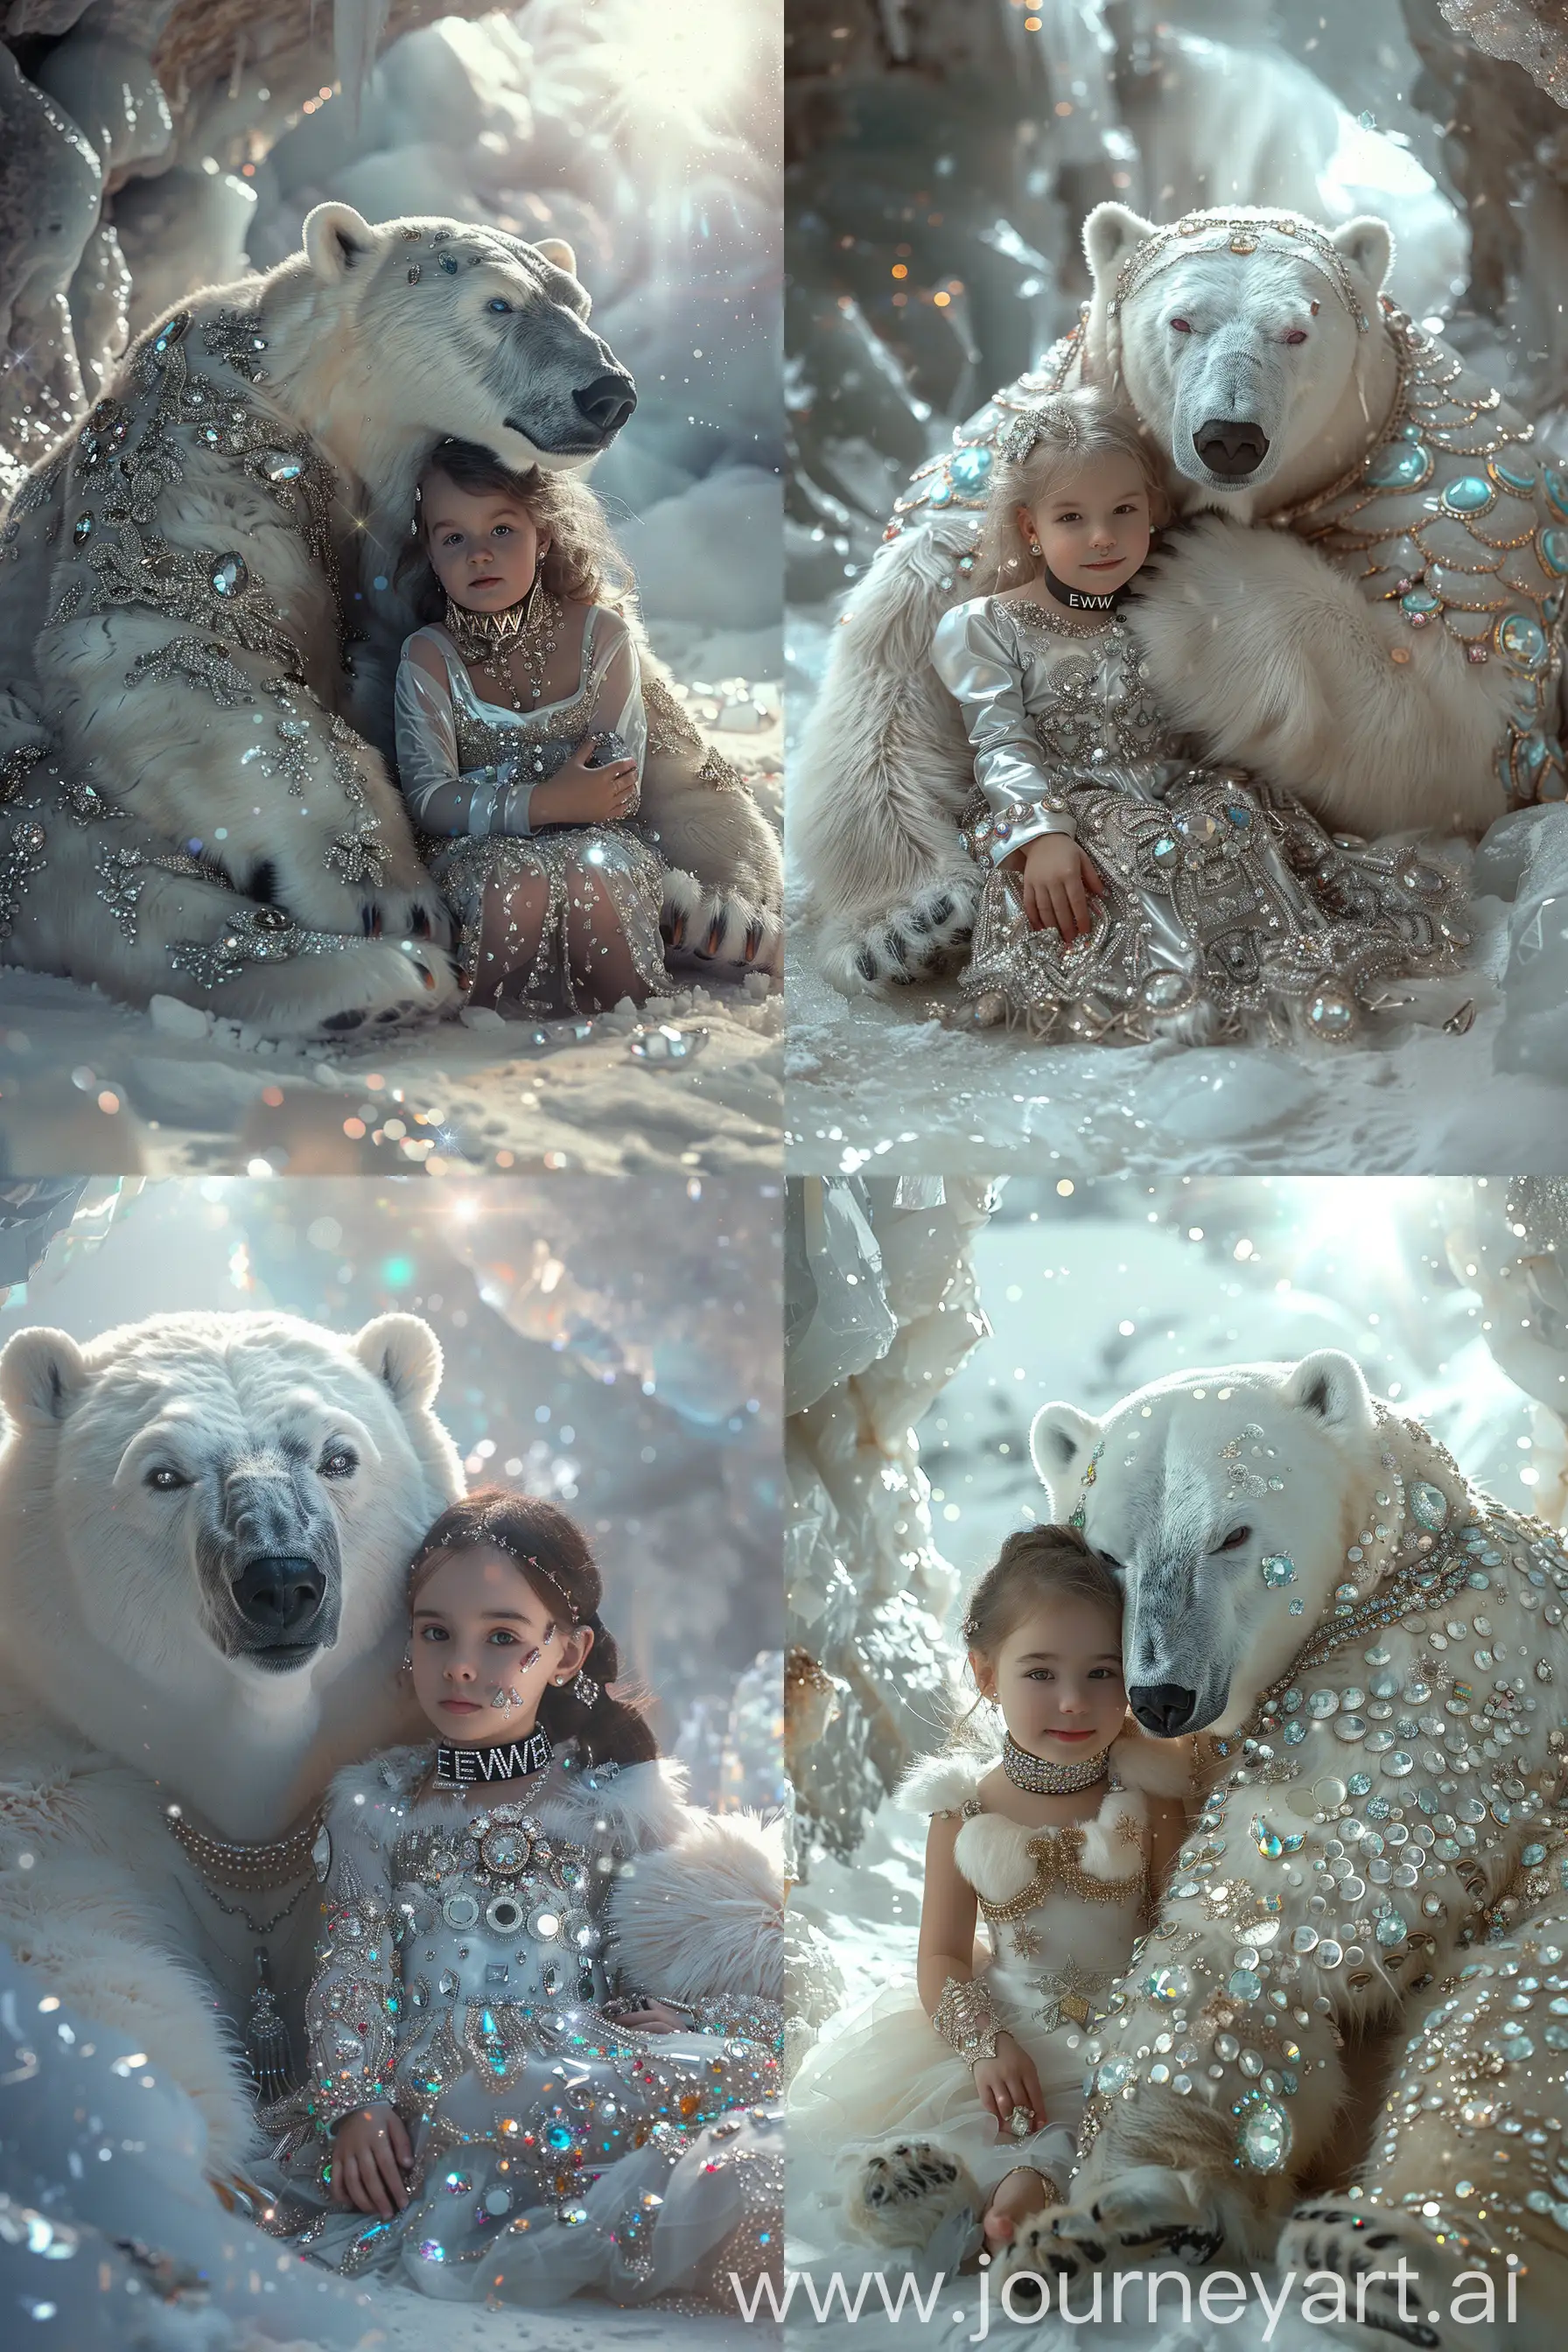 Magical-Encounter-Little-Girl-and-Polar-Bear-Embrace-in-a-Shimmering-Snow-Cave